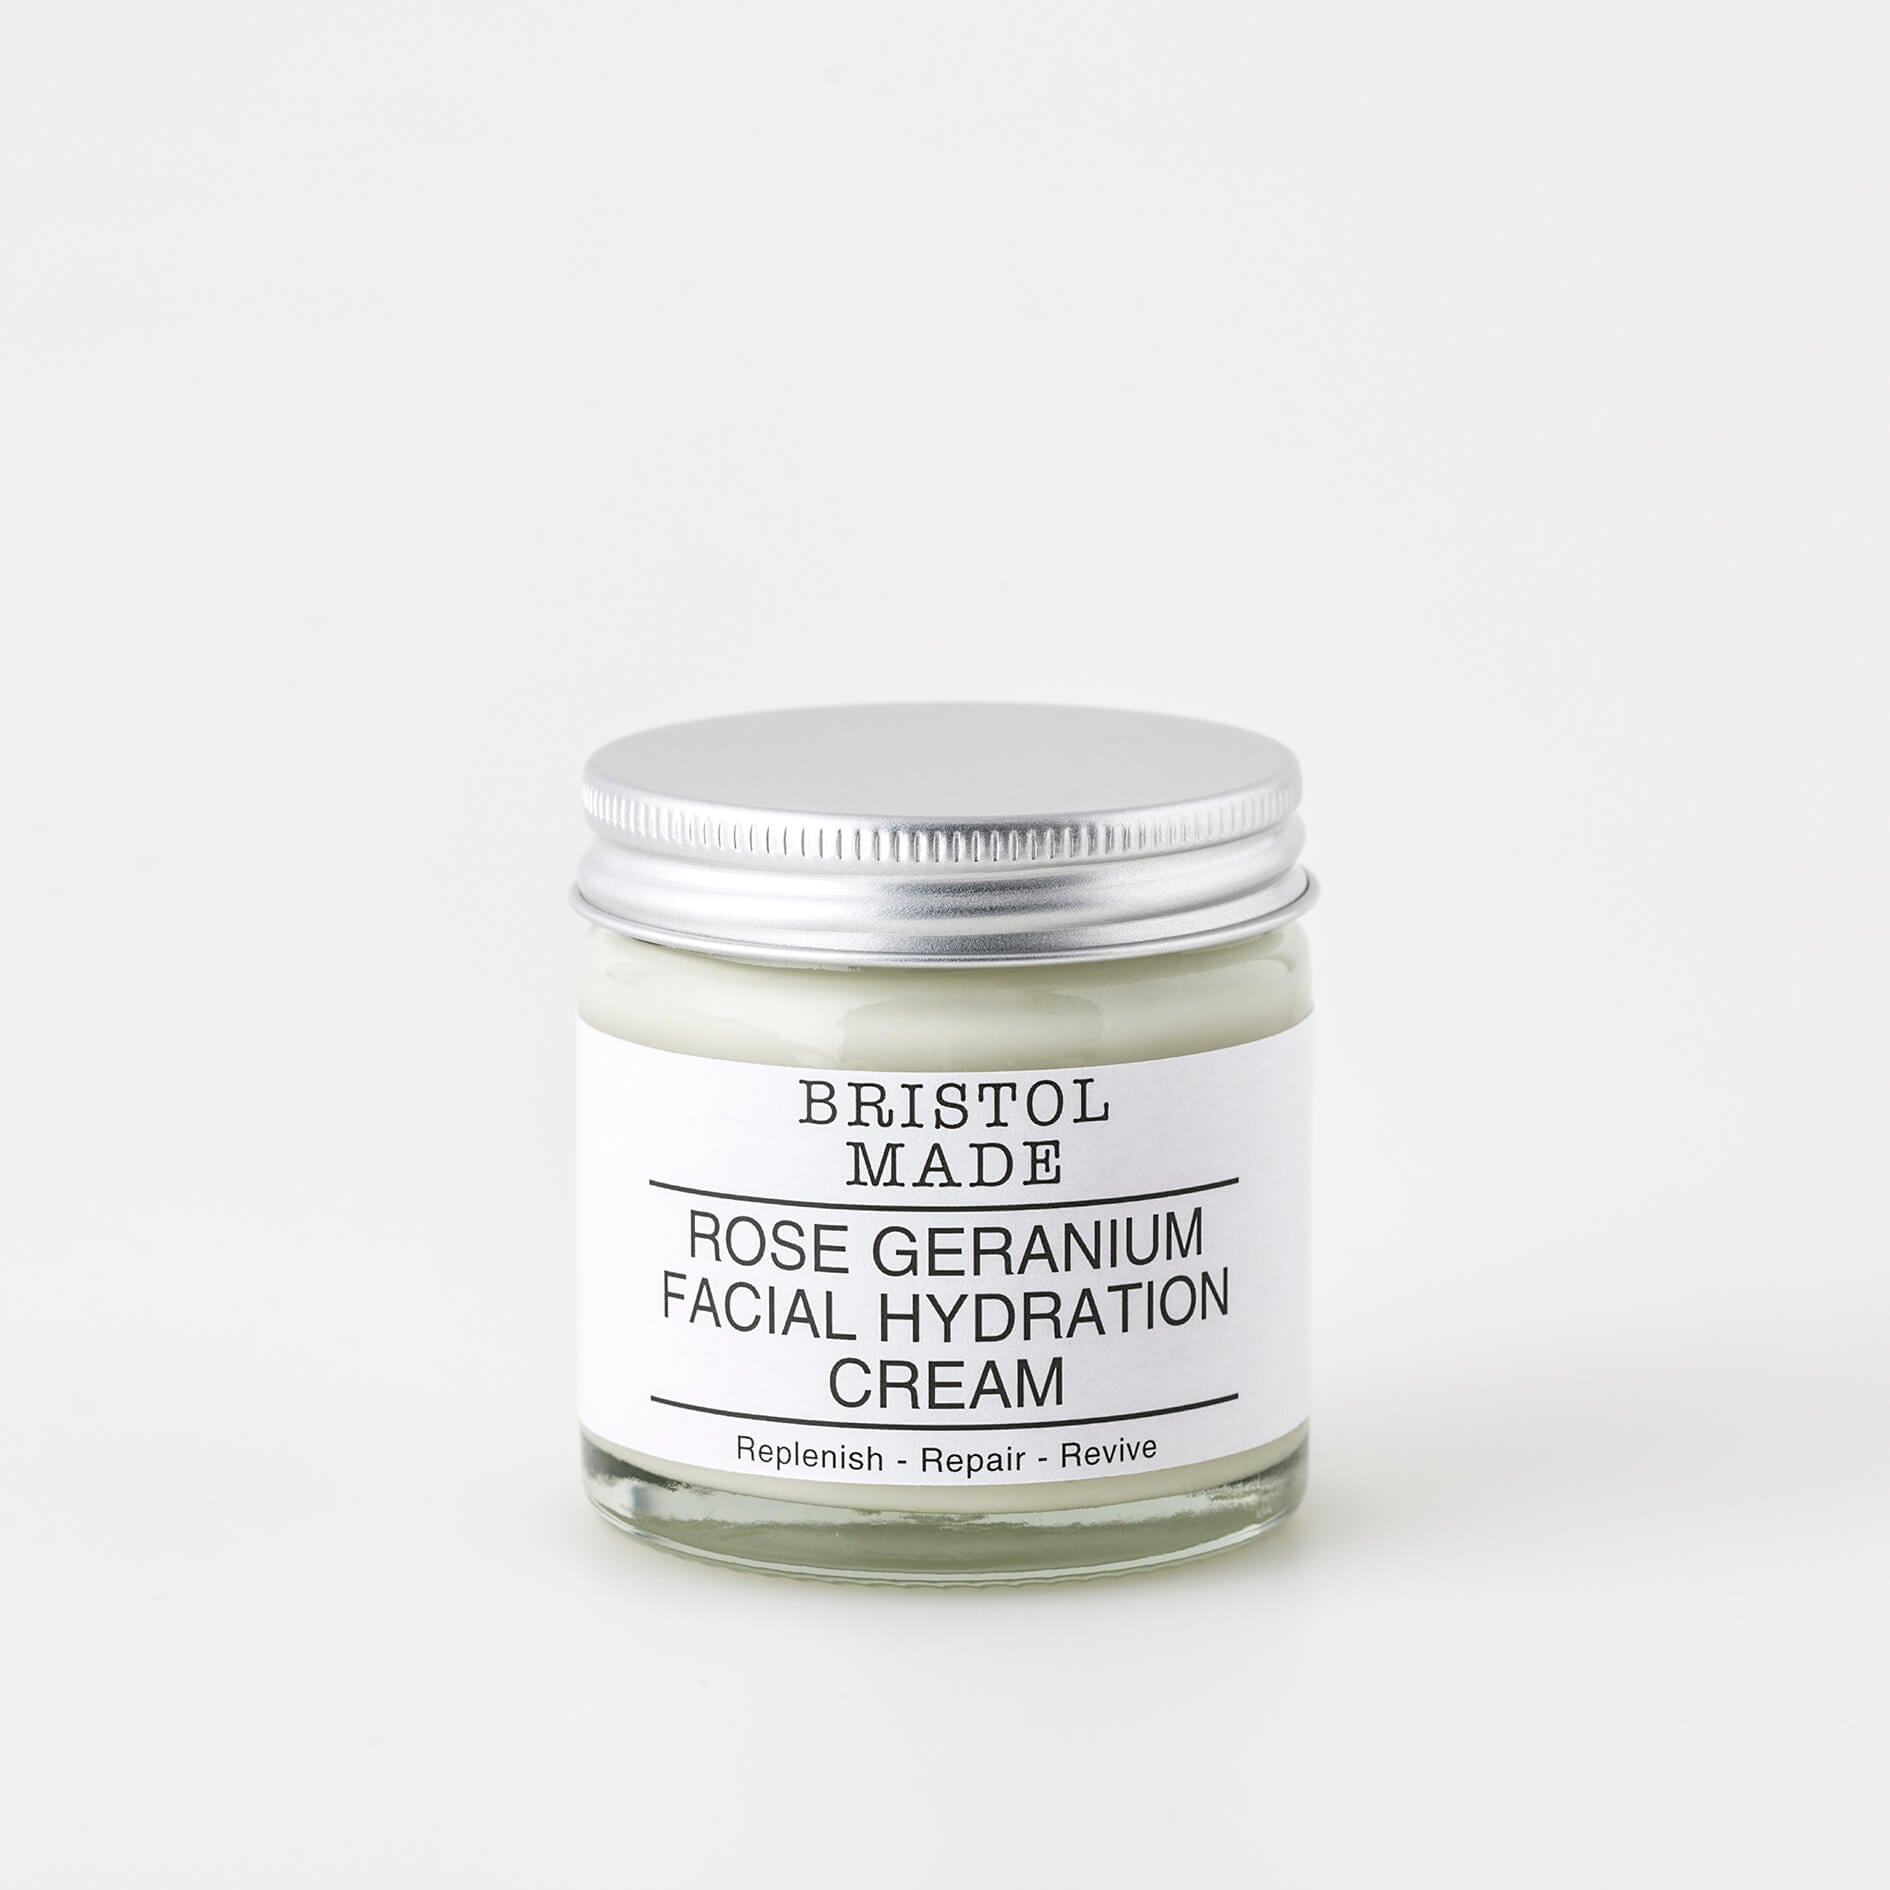 A 60ml clear glass jar of Bristolmade rose geranium face cream, featuring a white label with black text, highlighting its vegan ingredients. 